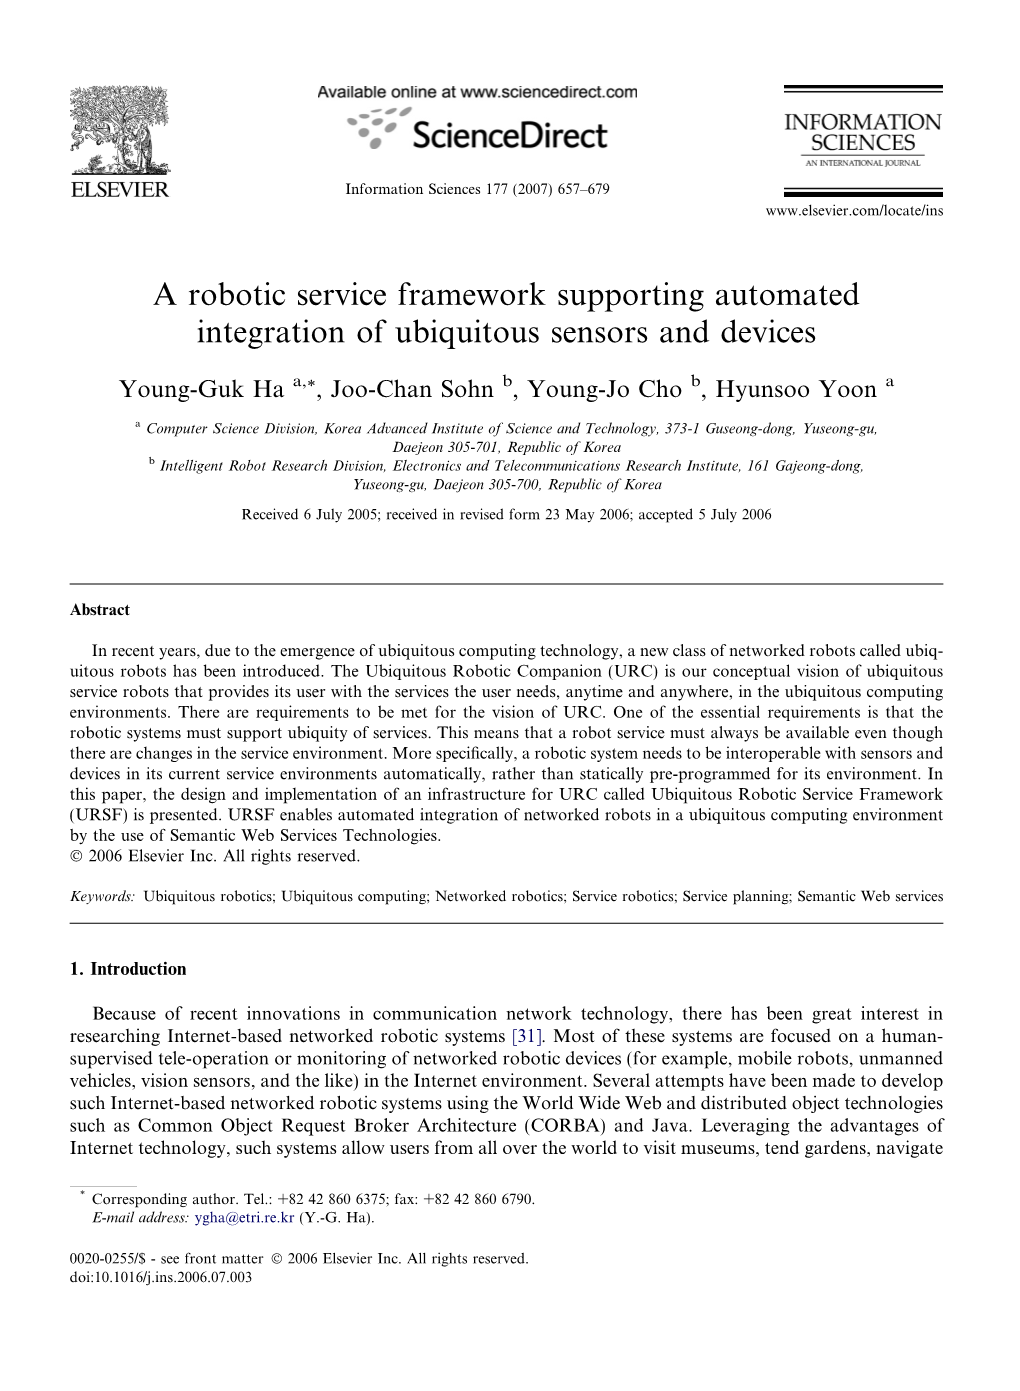 A Robotic Service Framework Supporting Automated Integration of Ubiquitous Sensors and Devices